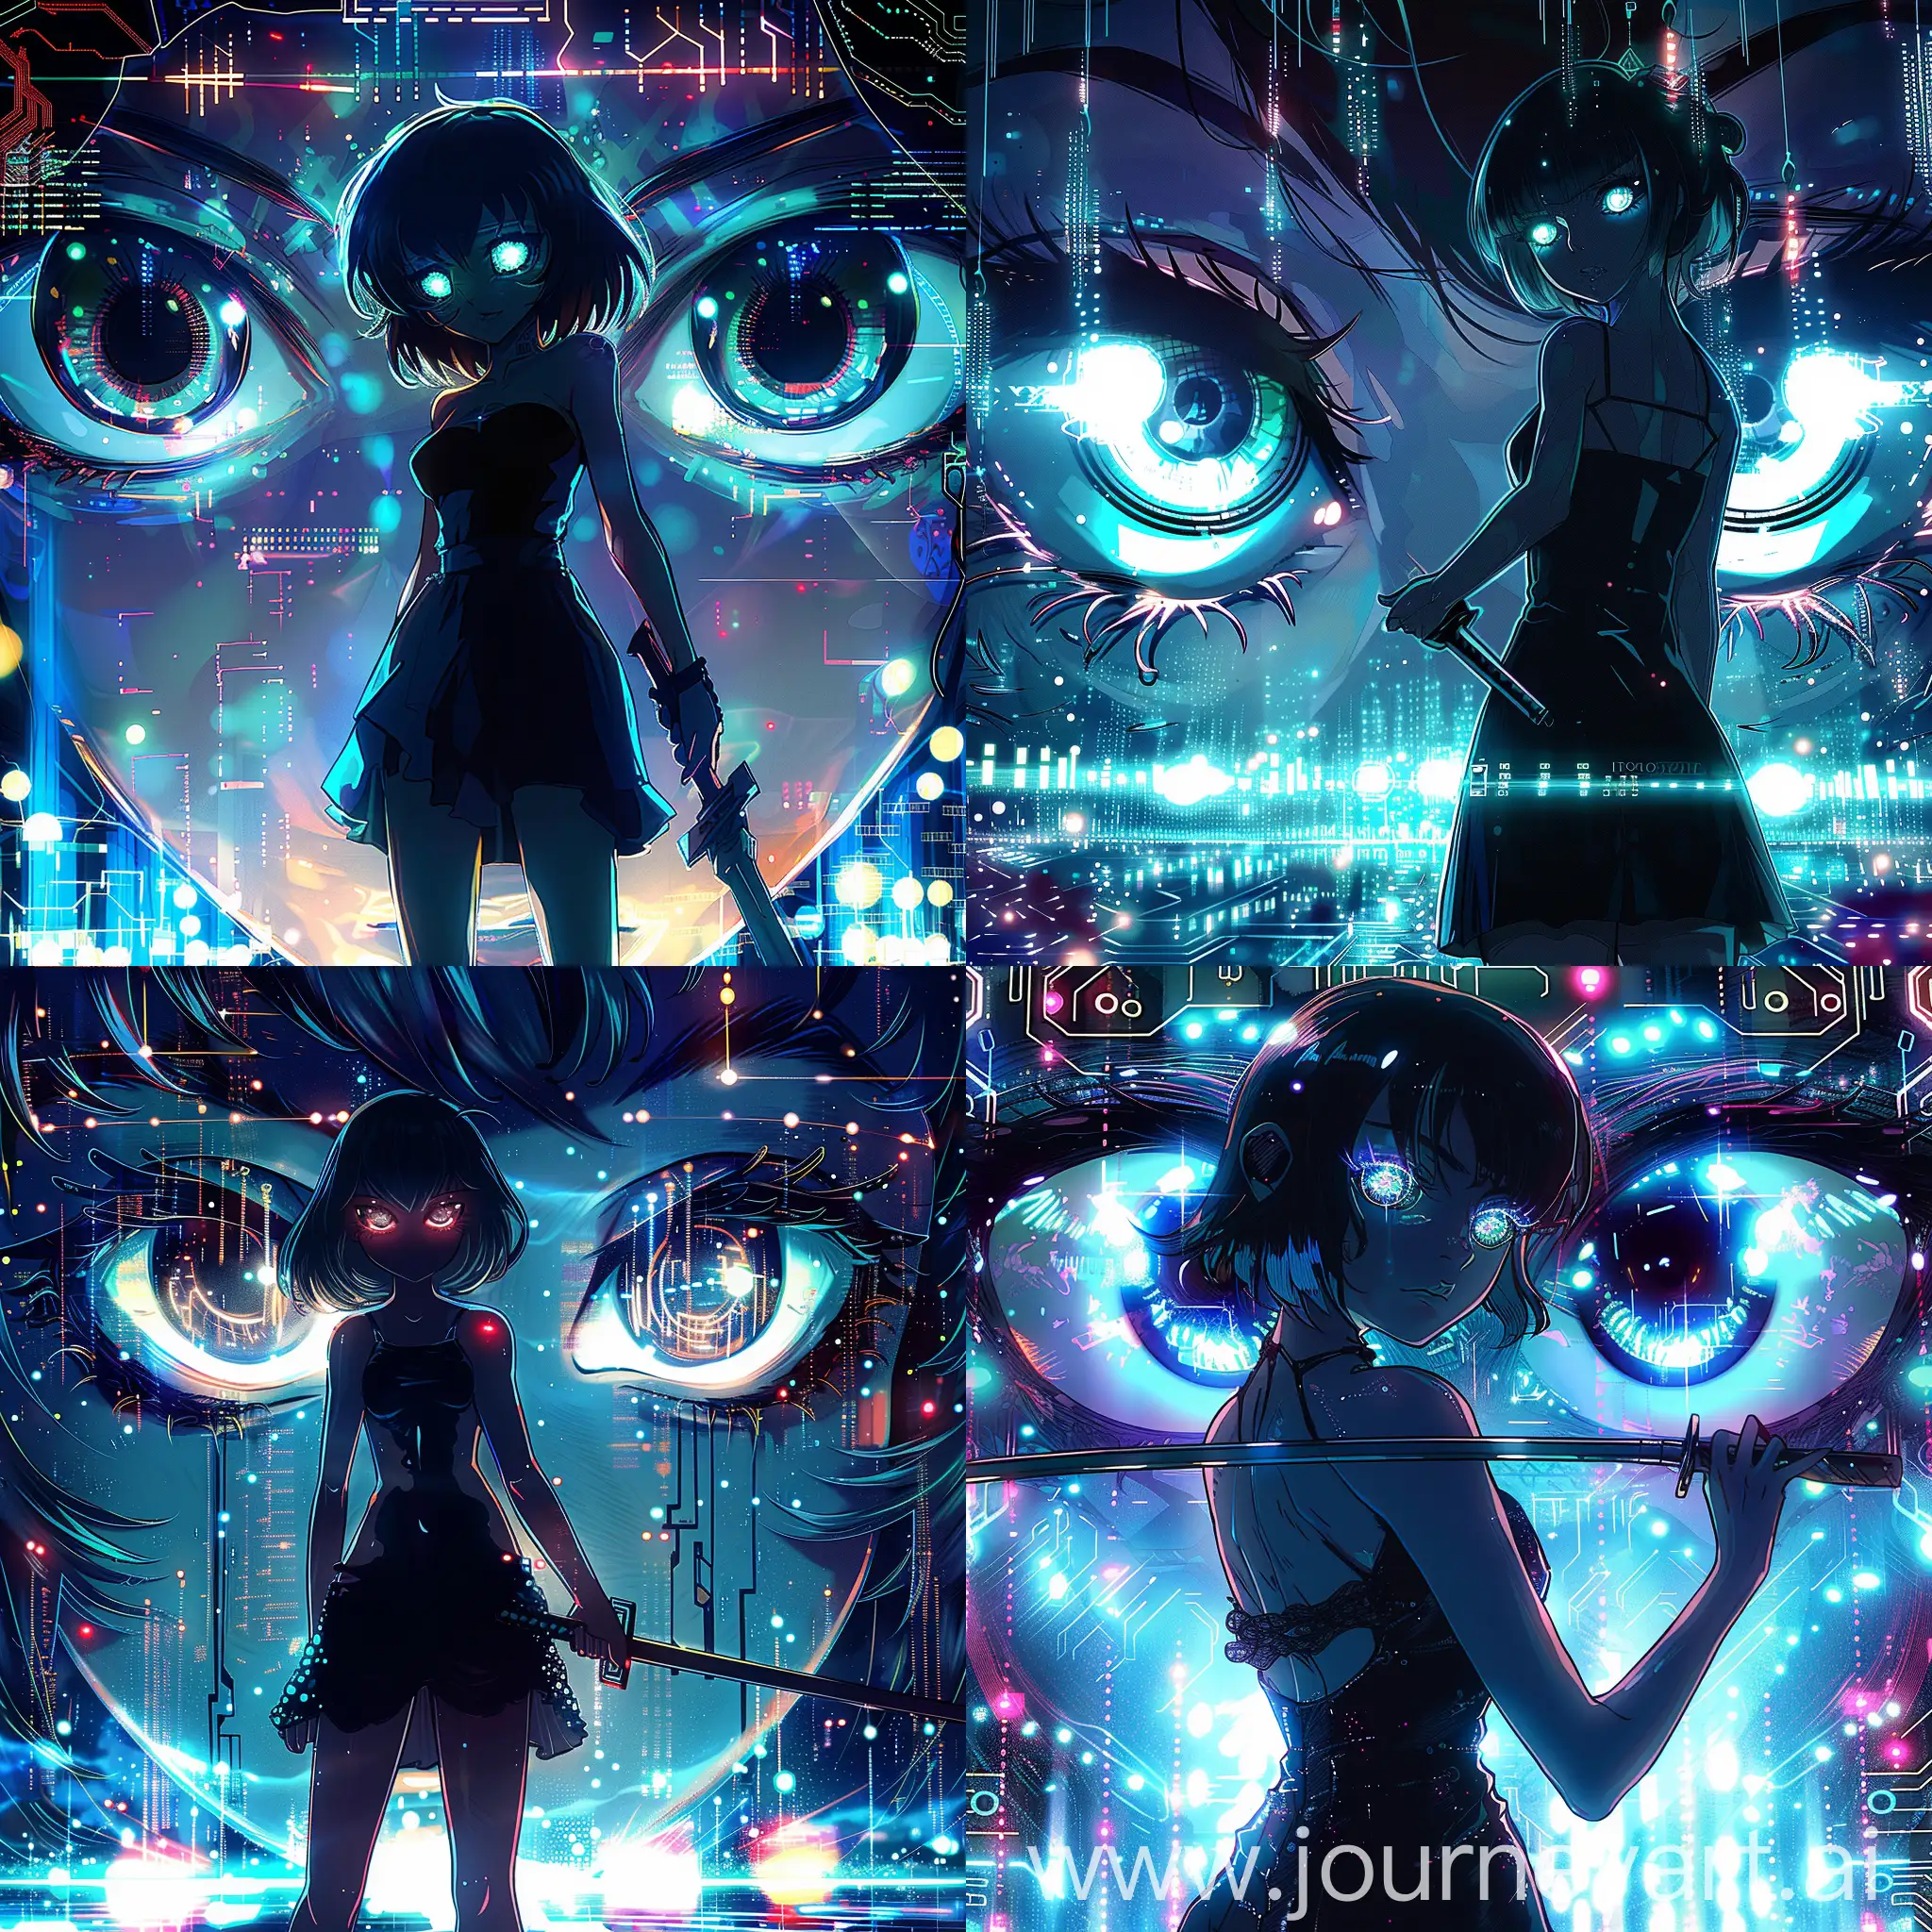 Cyberpunk-Anime-Girl-with-Glowing-Eyes-and-Sword-in-Digital-Landscape